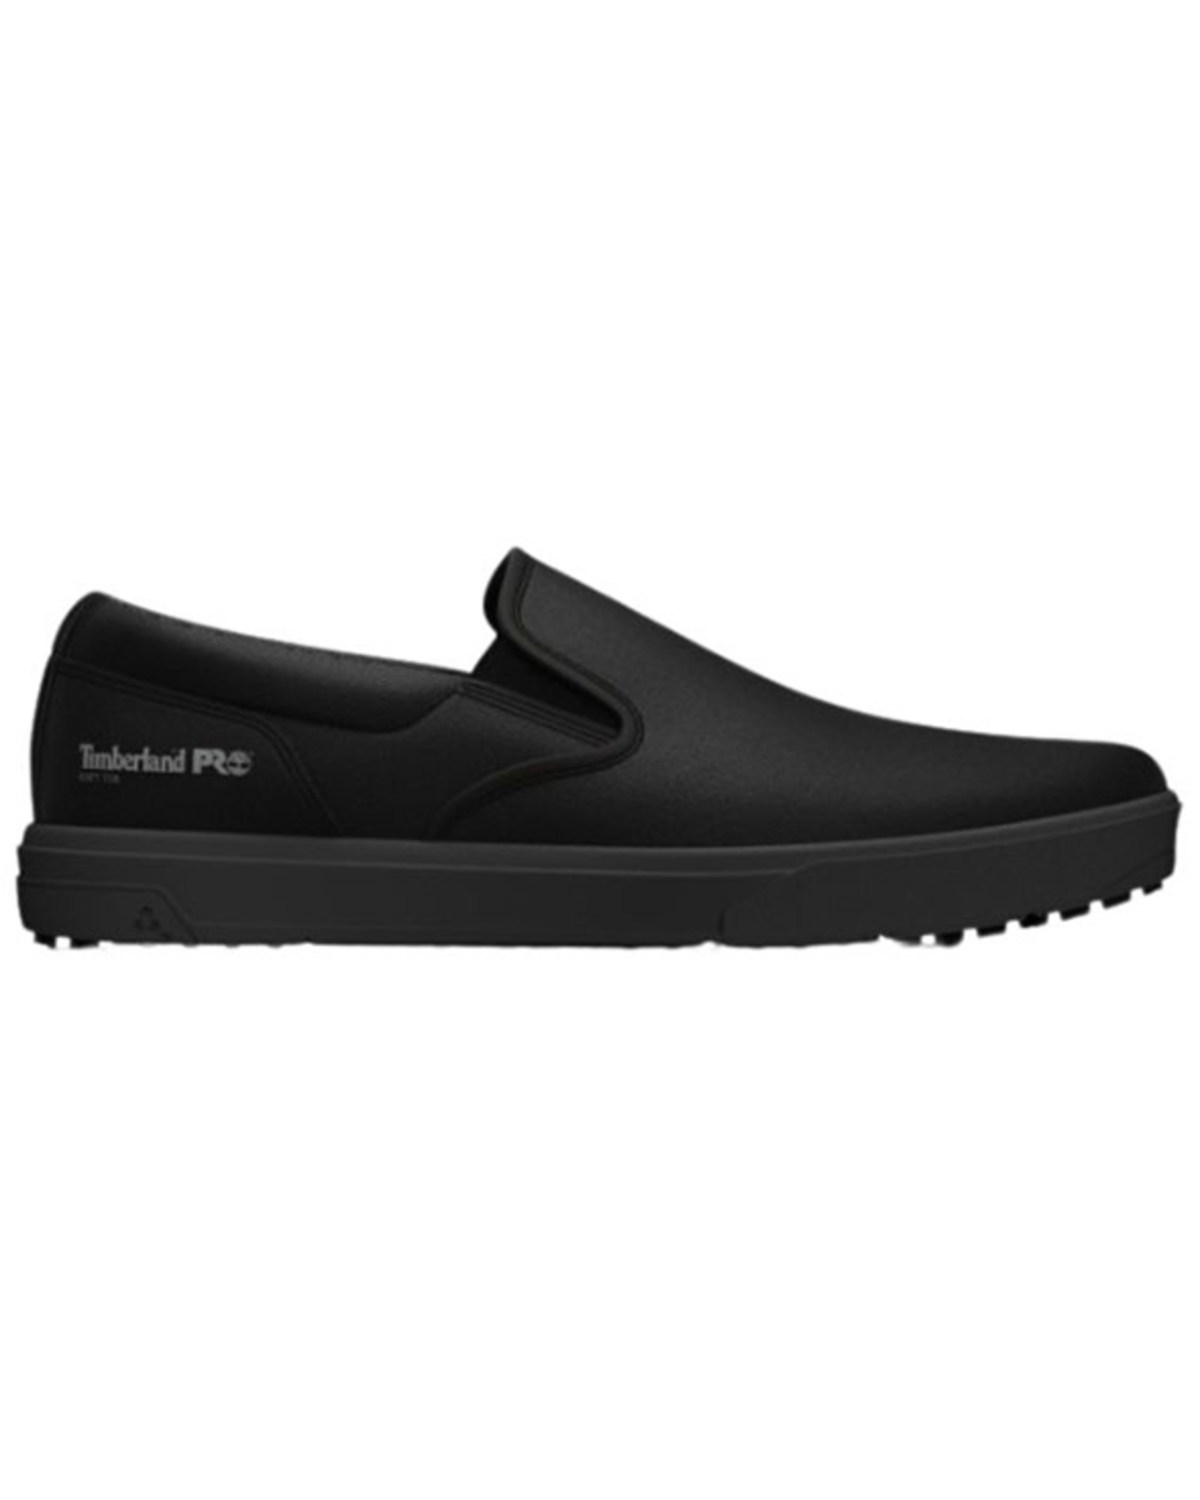 Timberland Men's Burbank Slip-On Casual Shoes